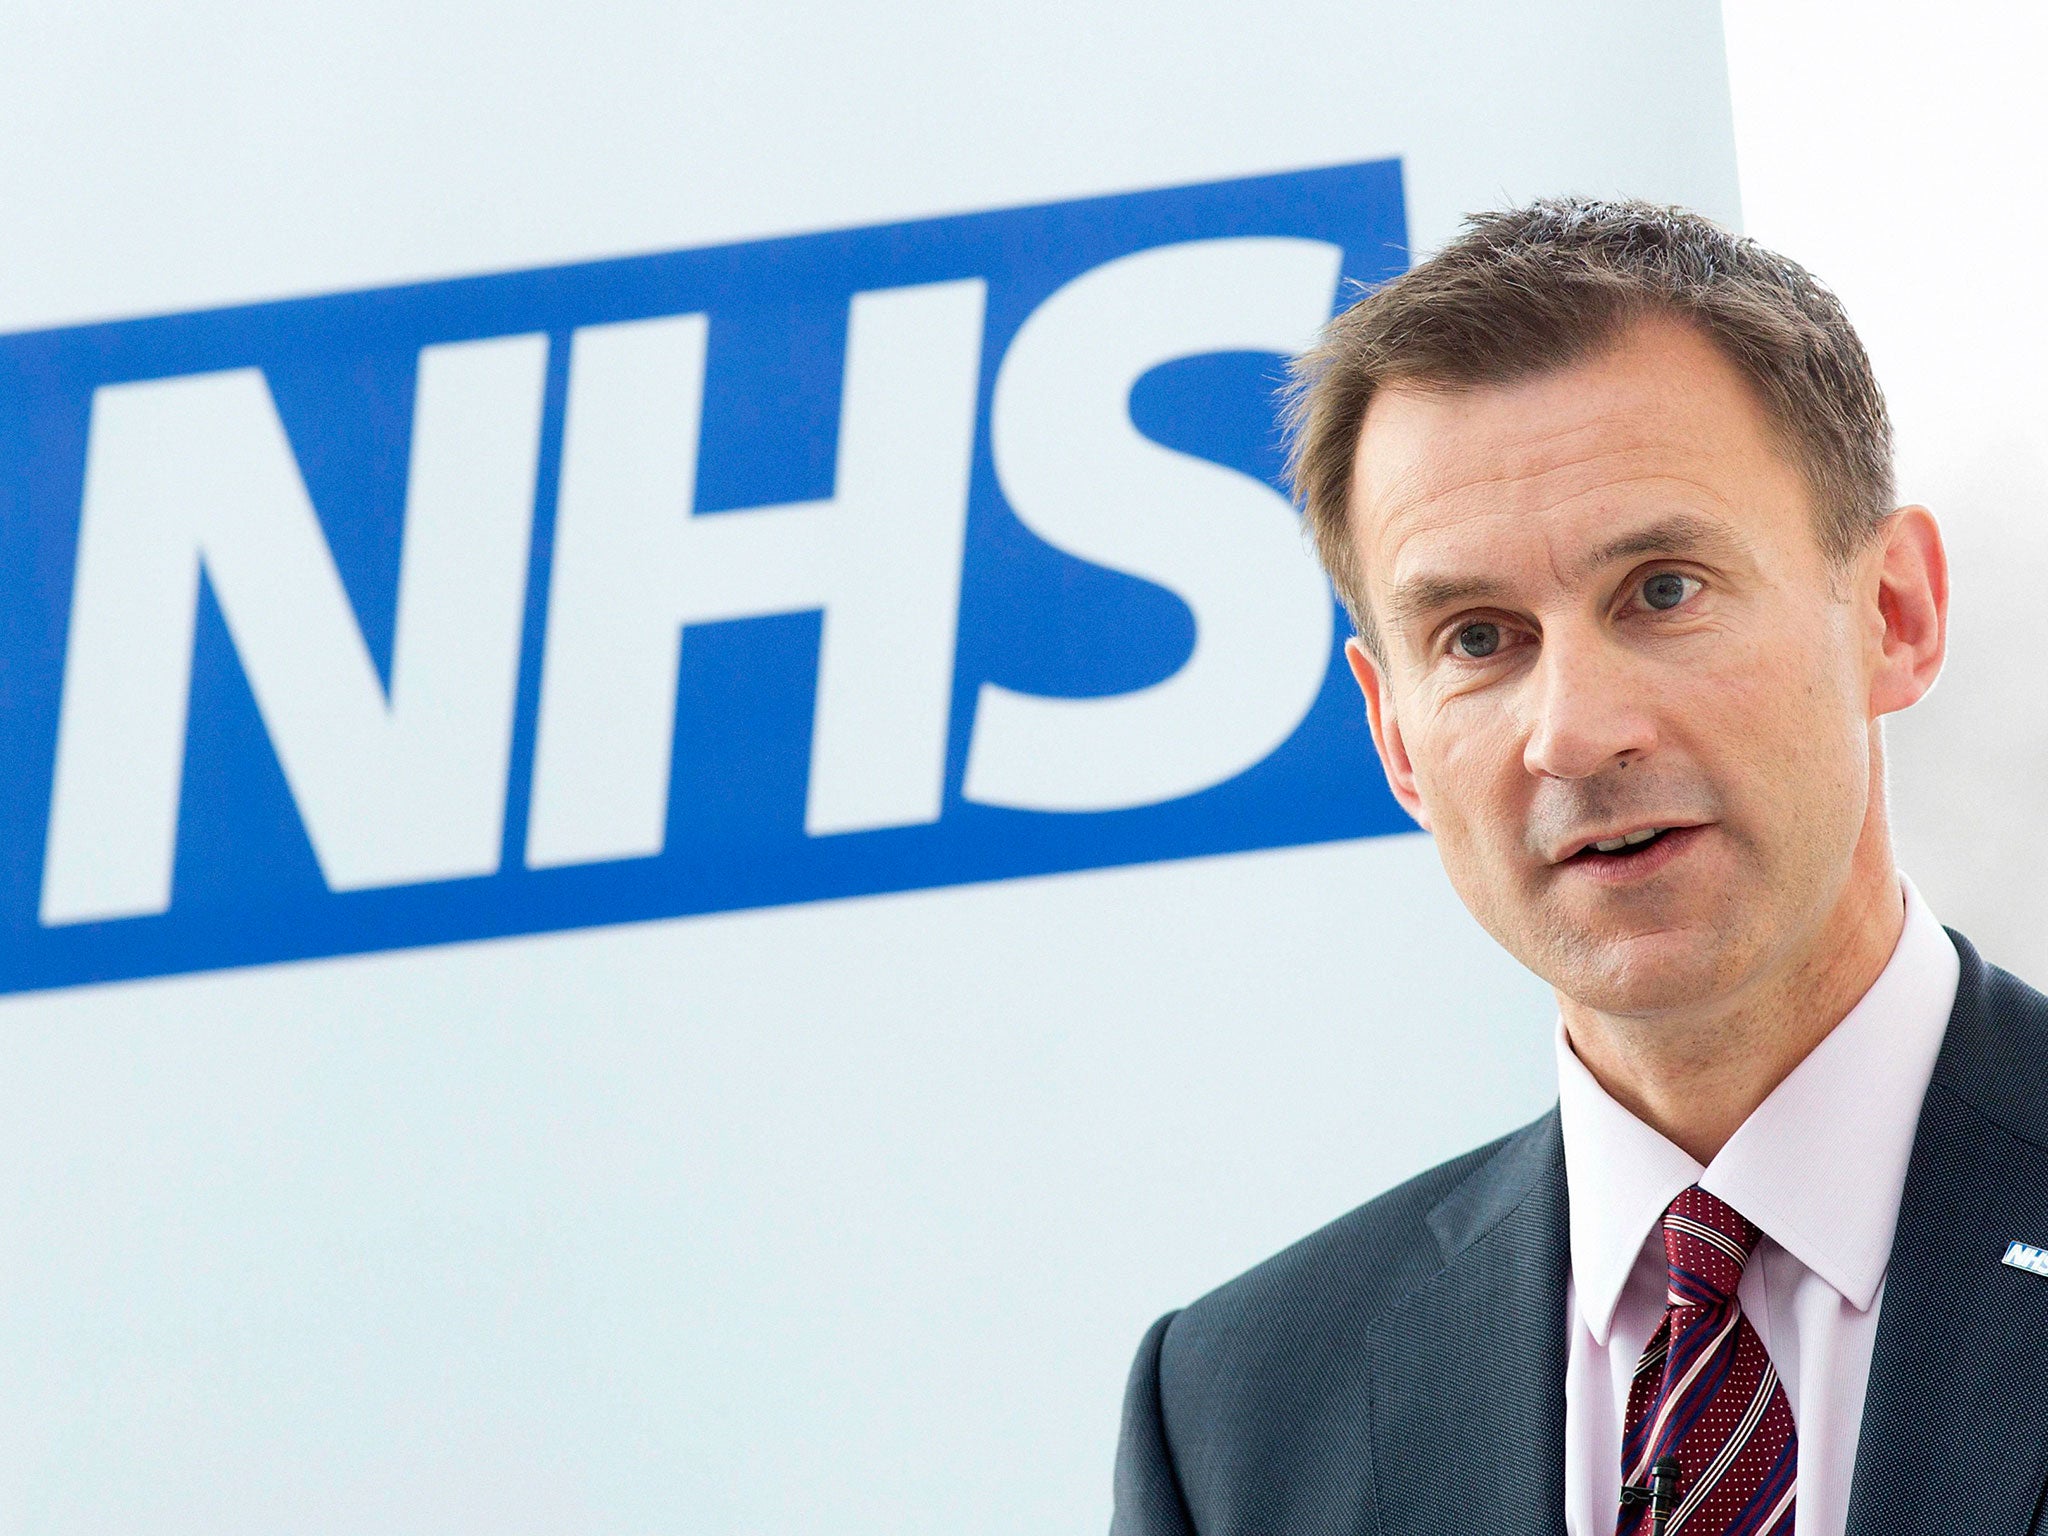 The NHS is in crisis